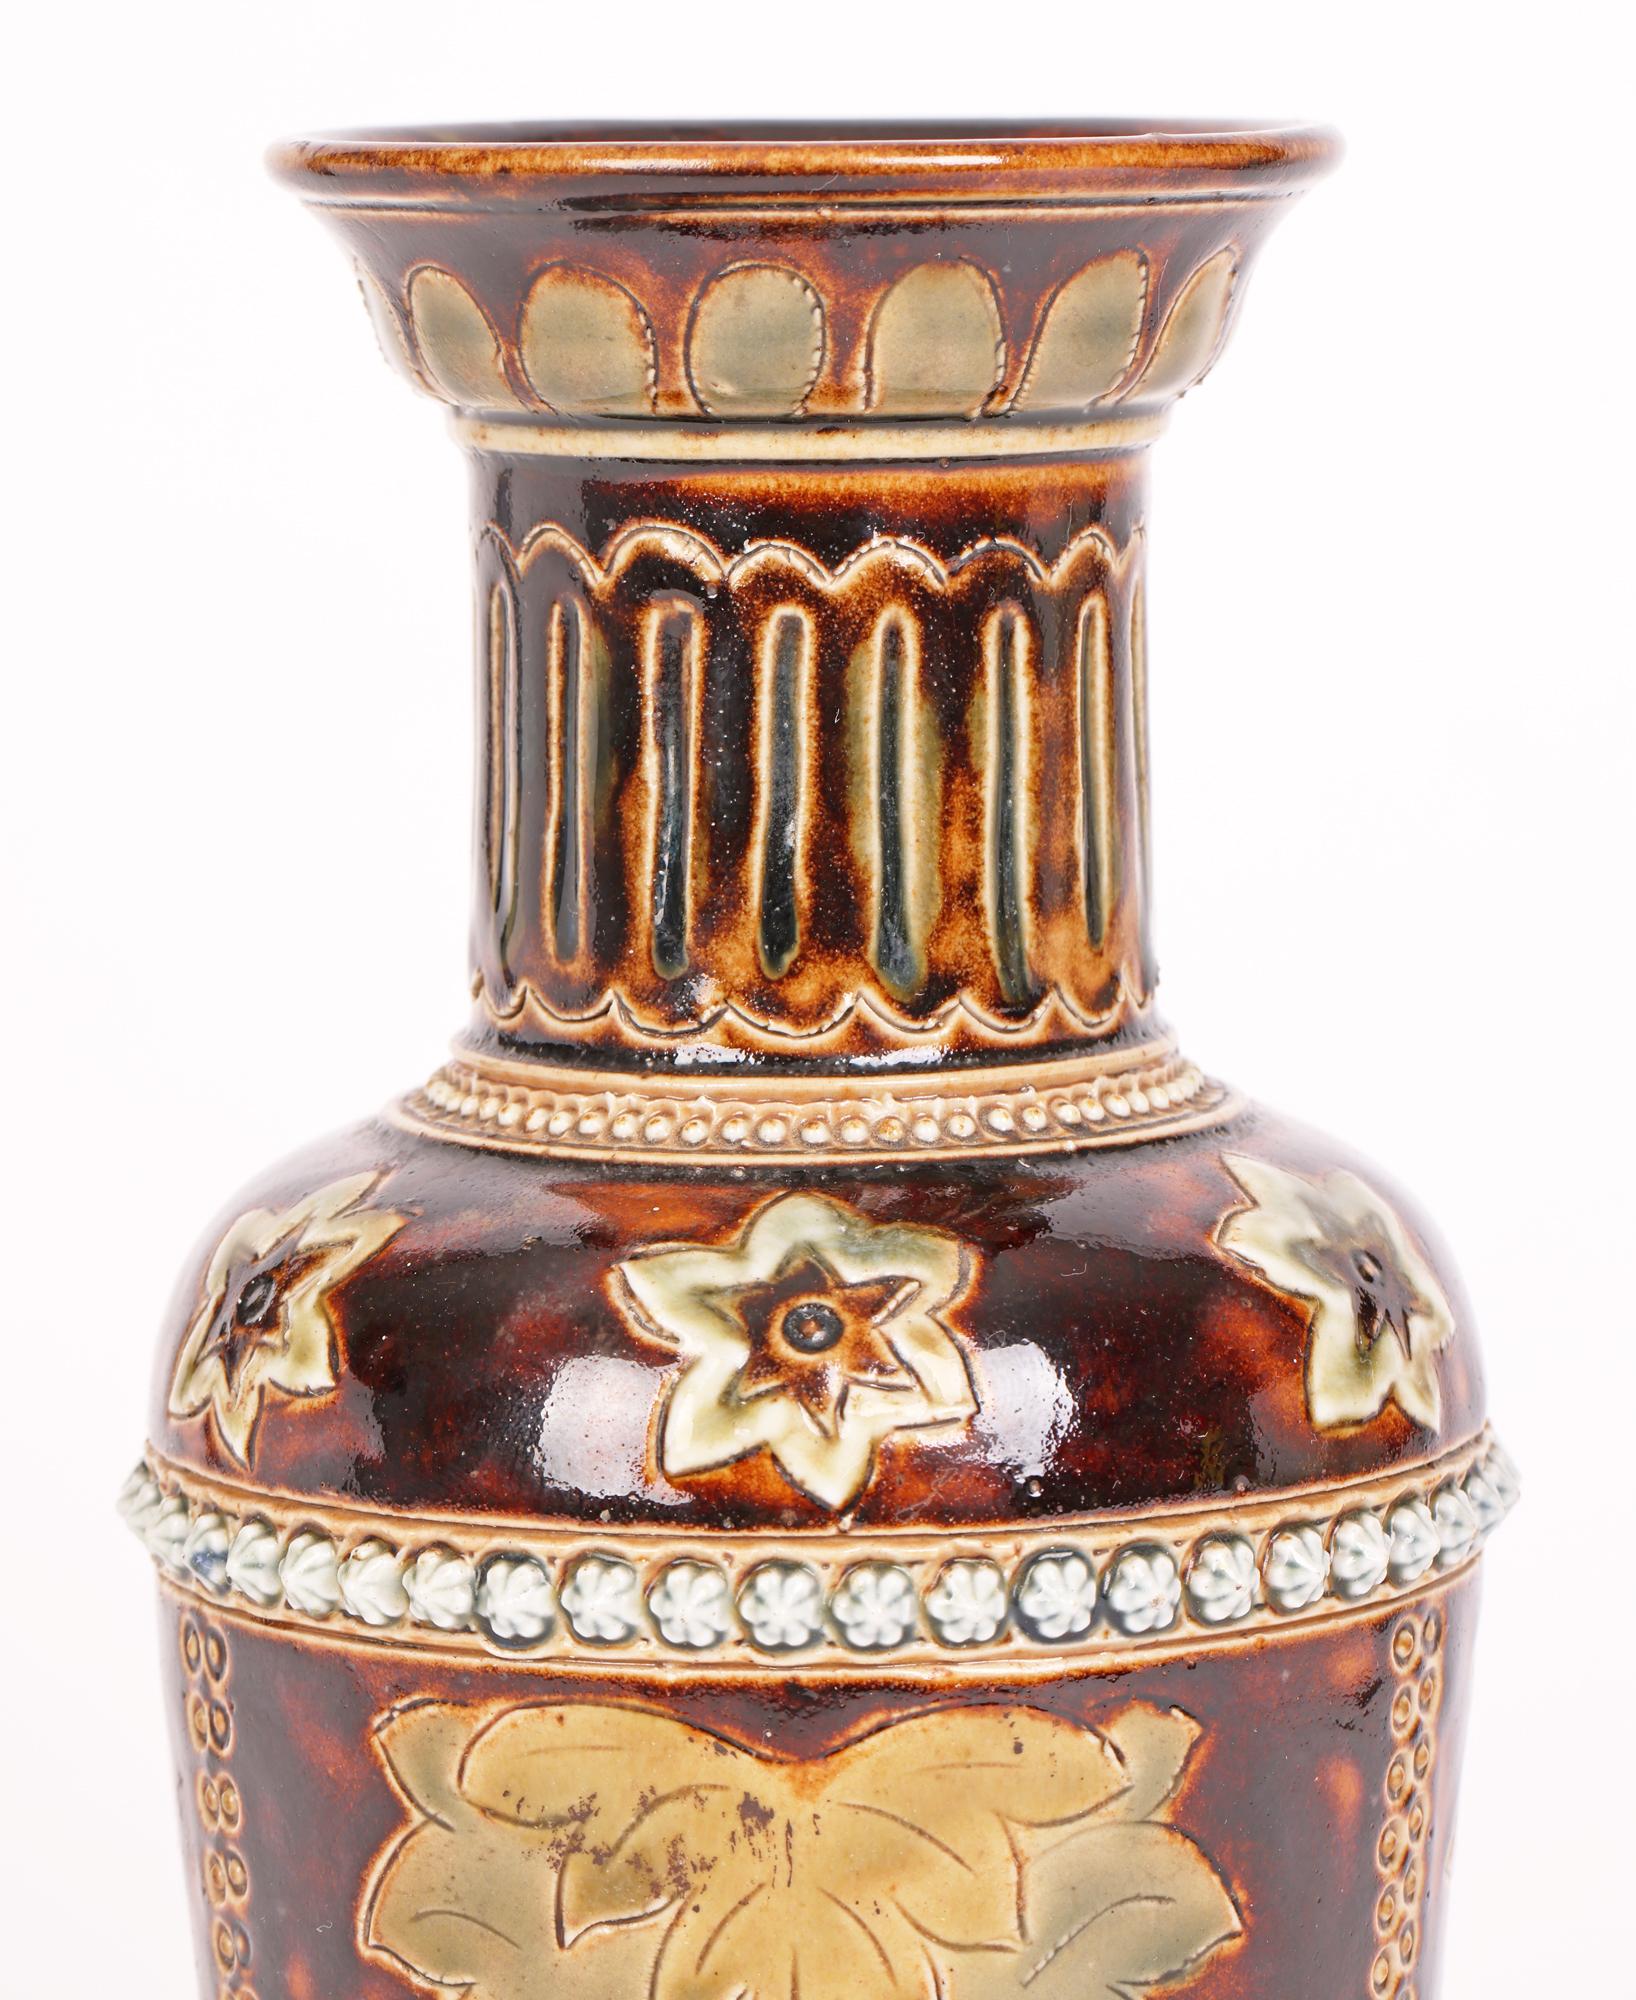 A stunning and early Doulton Lambeth Aesthetic Movement vase decorated with panels containing stylized floral designs by renowned artist Louisa E Edwards and dated 1876. 

Louisa Edwards was one of the mains artists at Doulton Lambeth and was